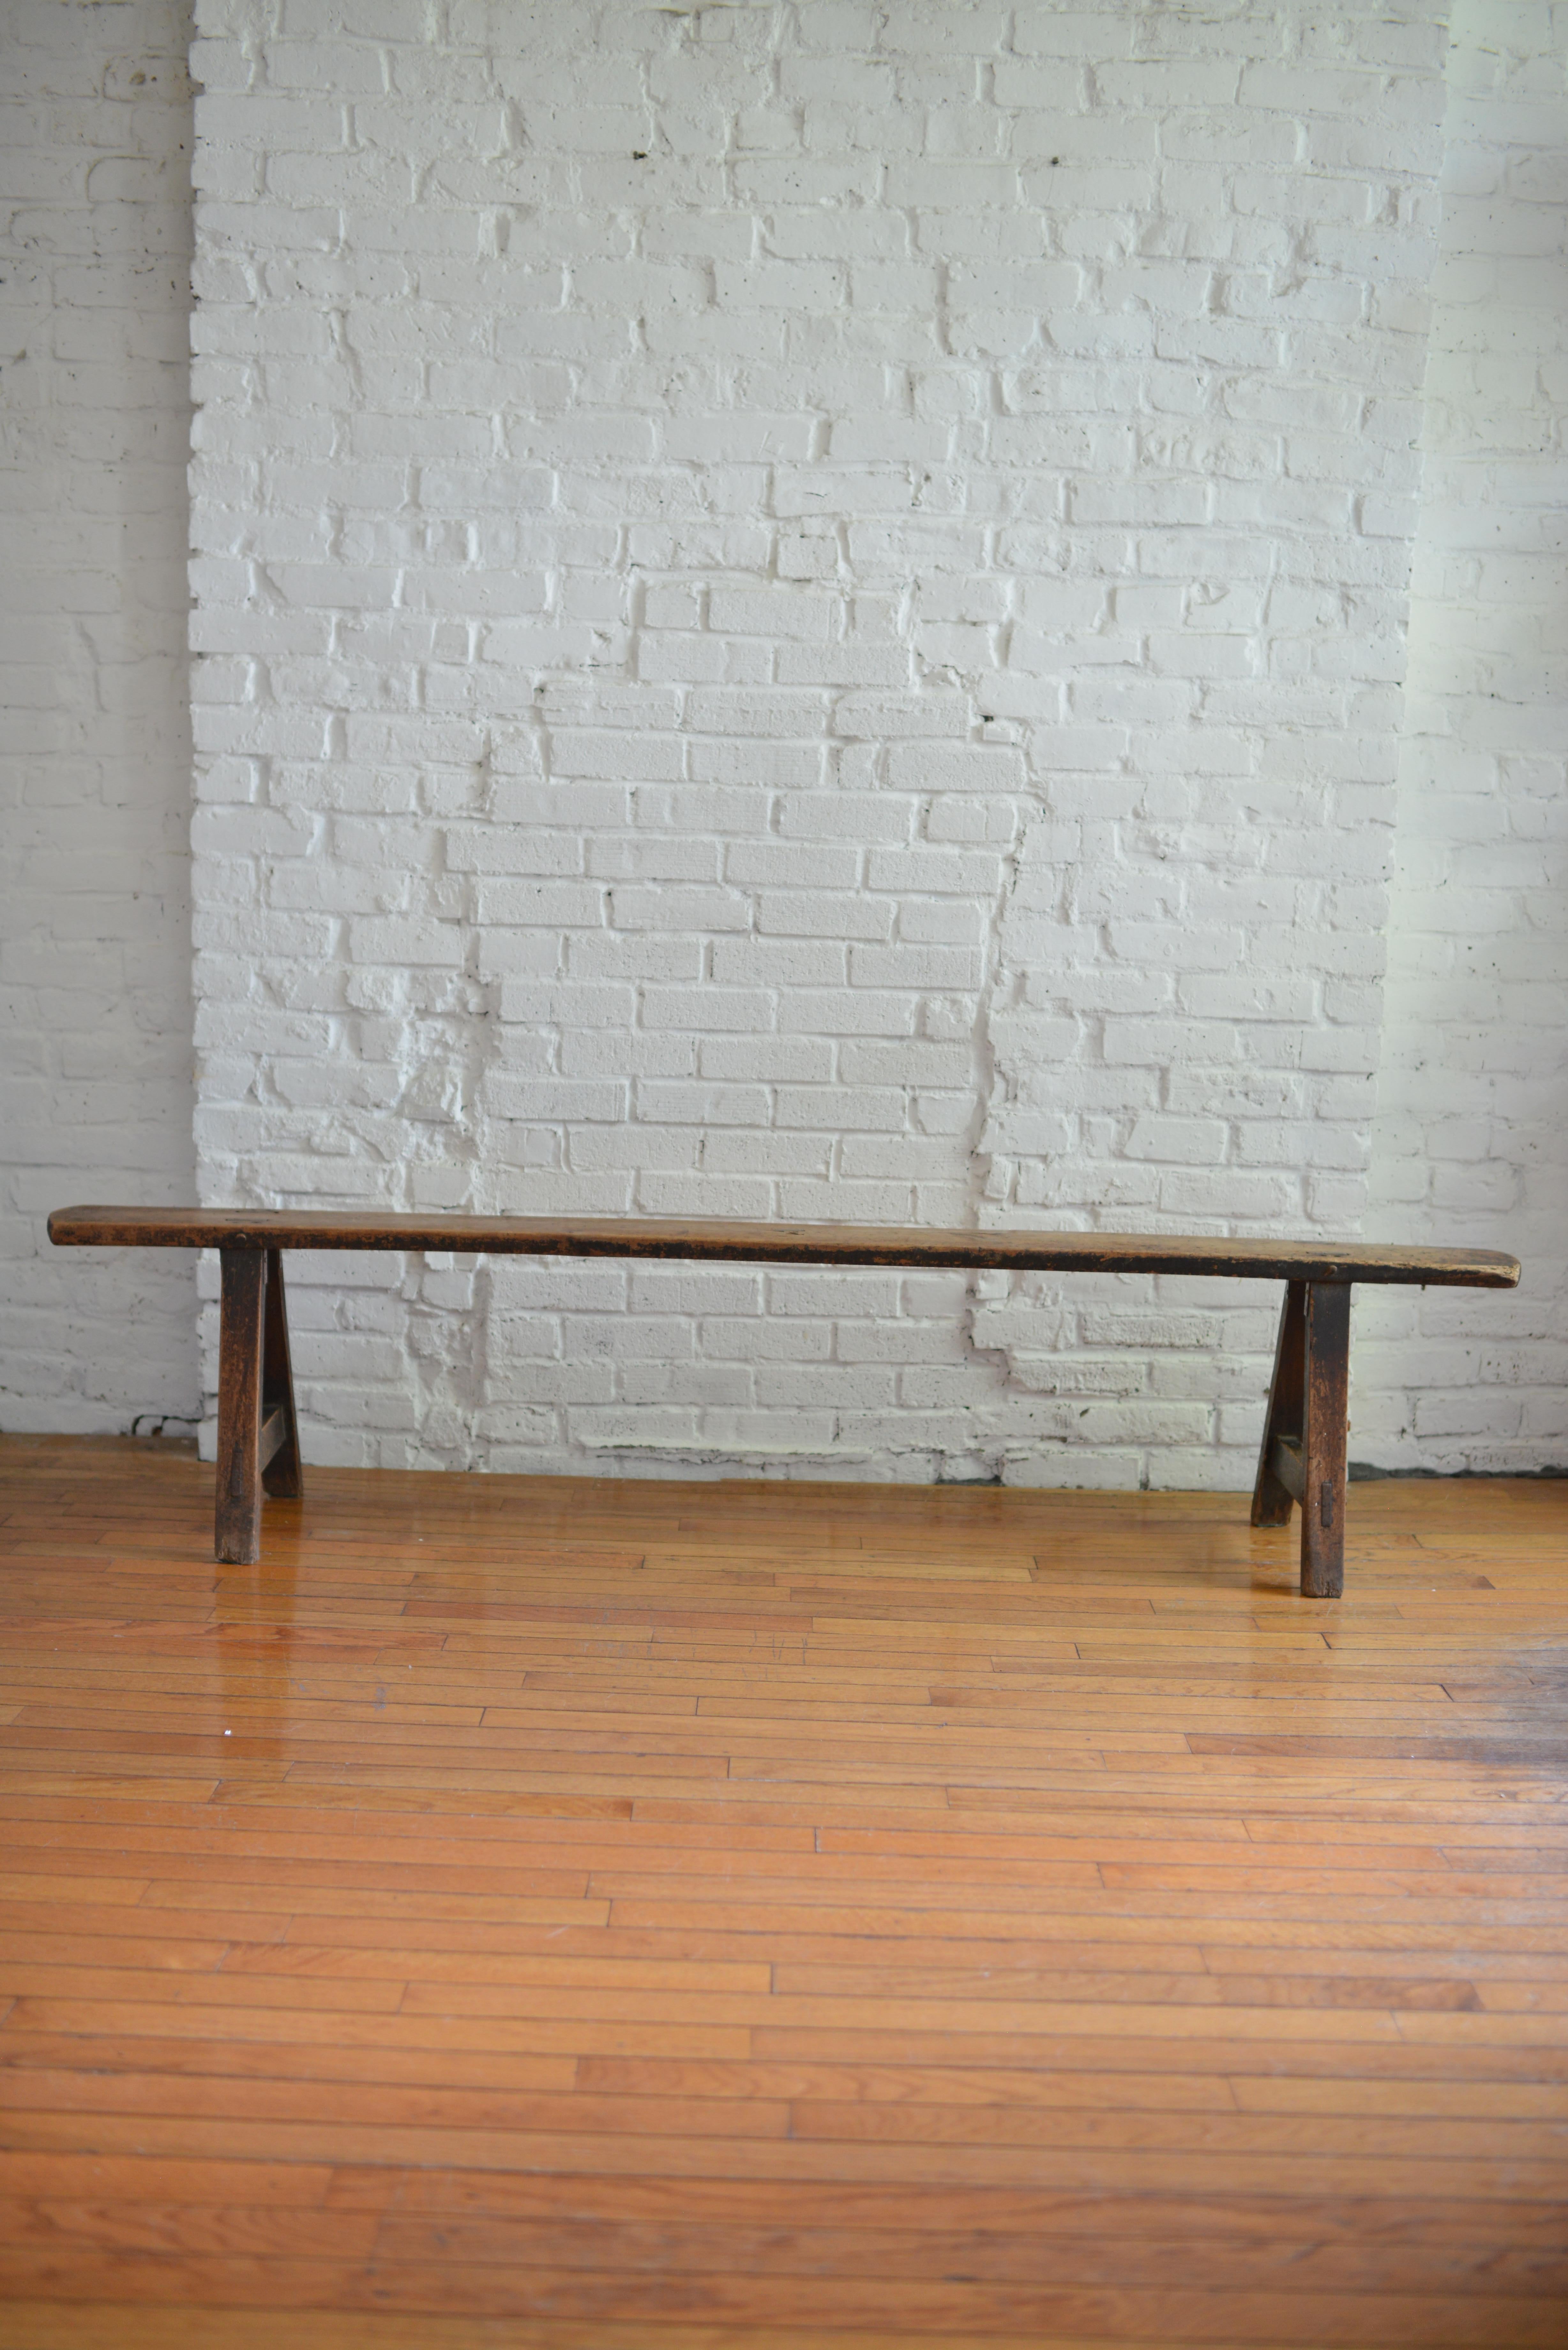 Antique primitive pine bench. This handmade bench is made of solid pine and stands on a pair of angled trestle a-frame legs with visible mortise and through tenon joinery. The six and half foot seat is built with one single rectangular board plank